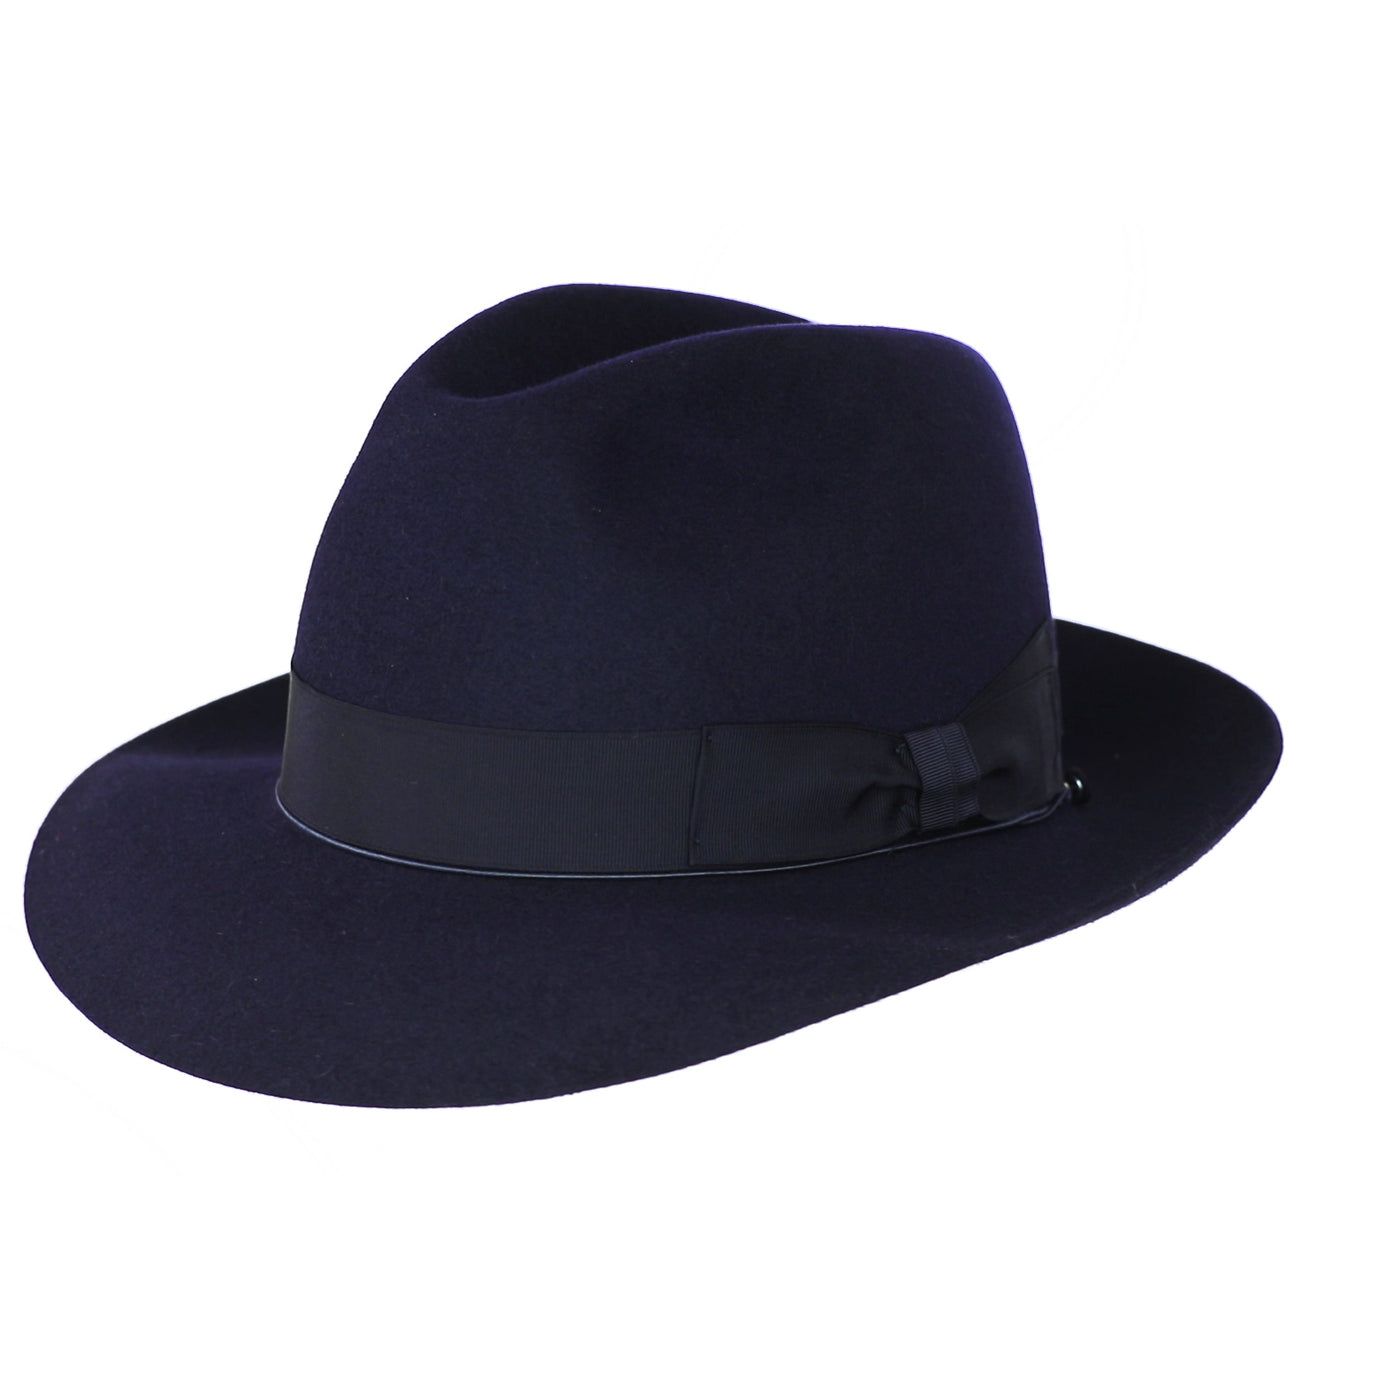 Trionfo 212 - Navy, product_type] - Borsalino for Atica fedora hat